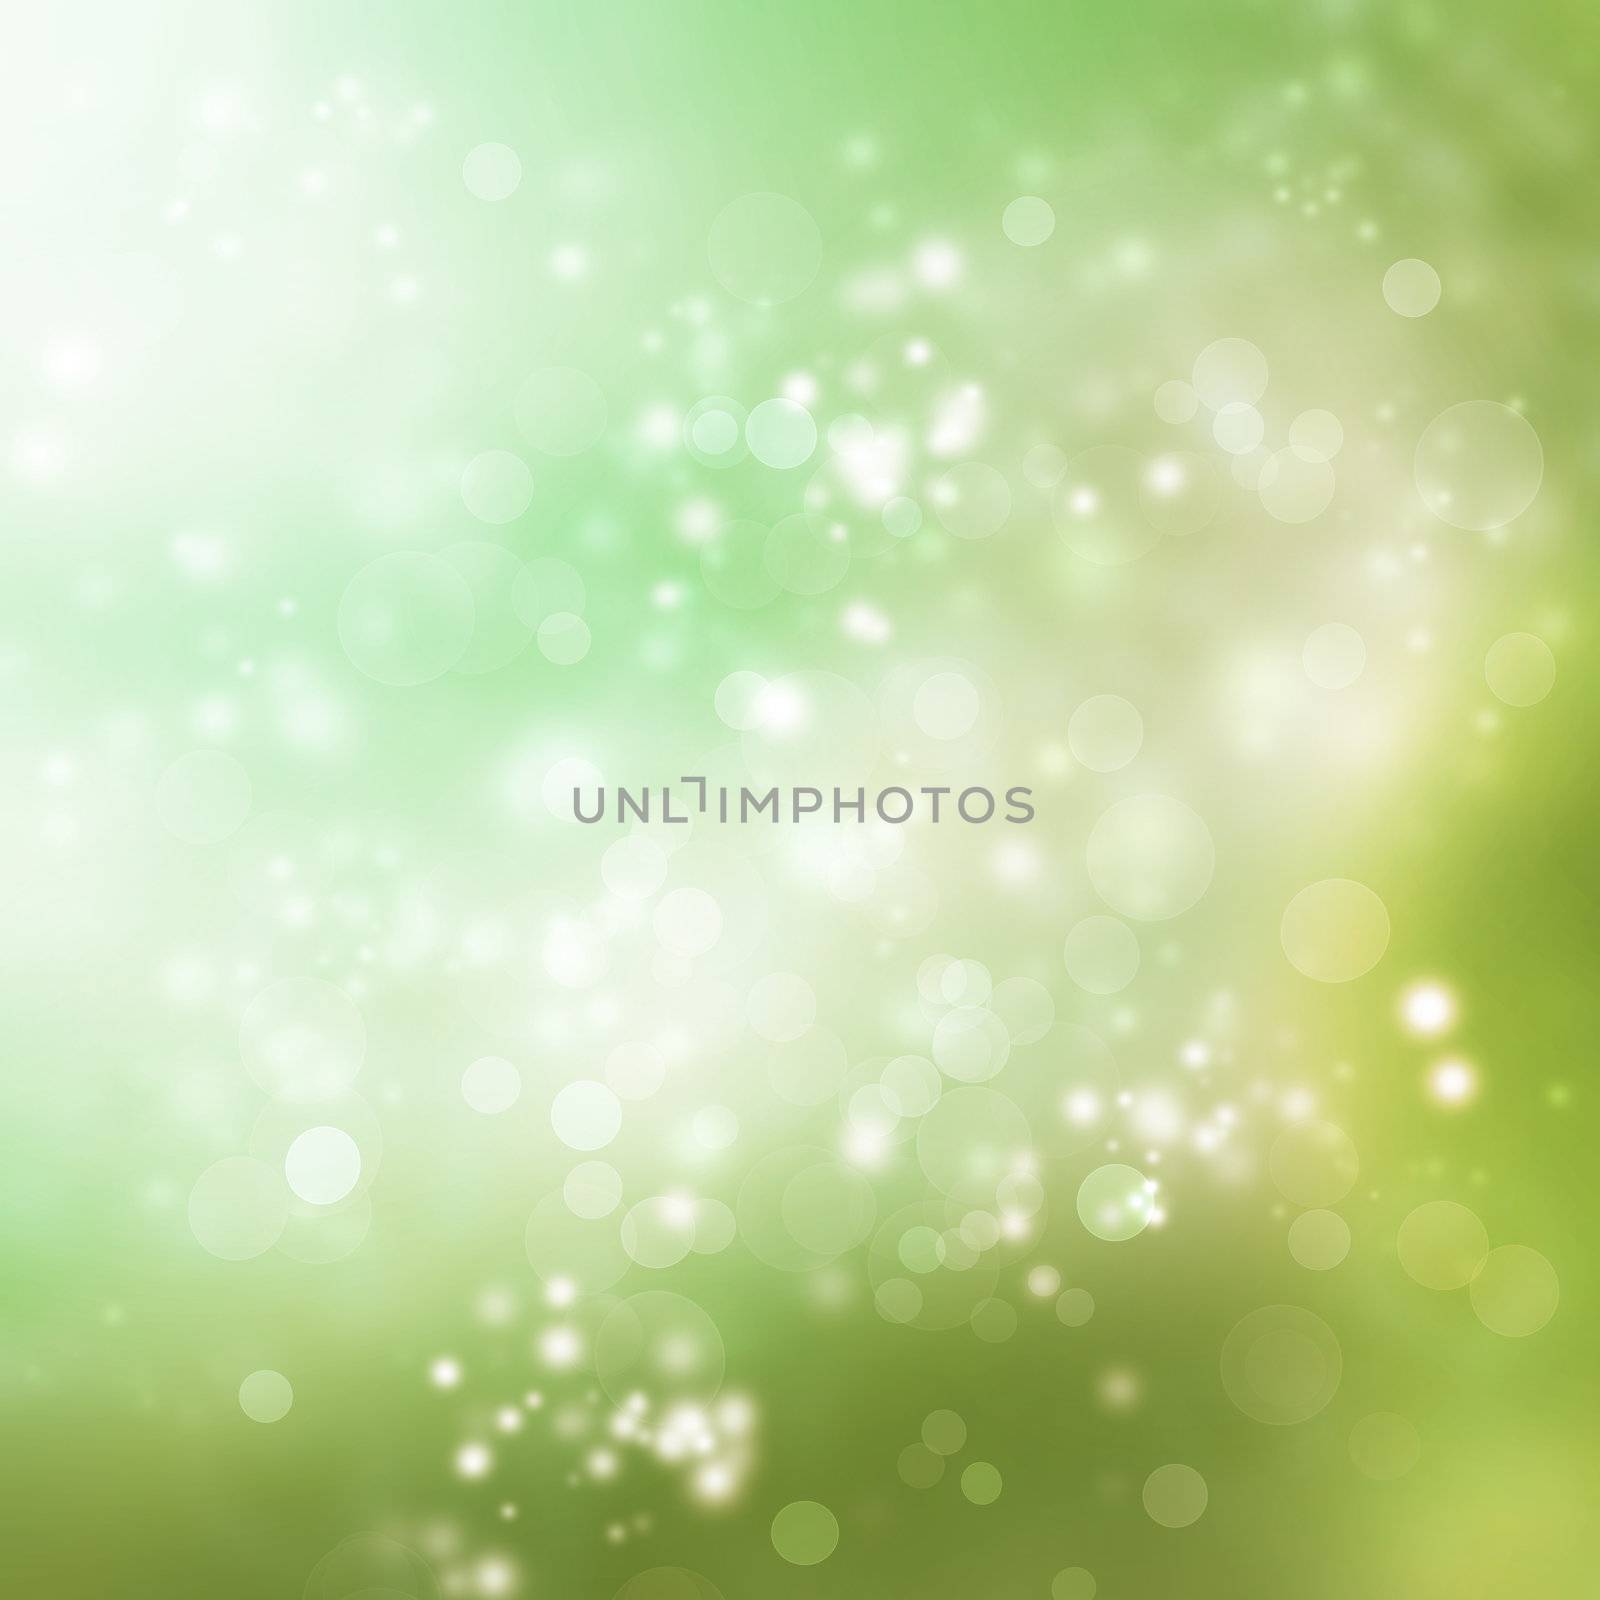 Abstract soft lights background by melpomene